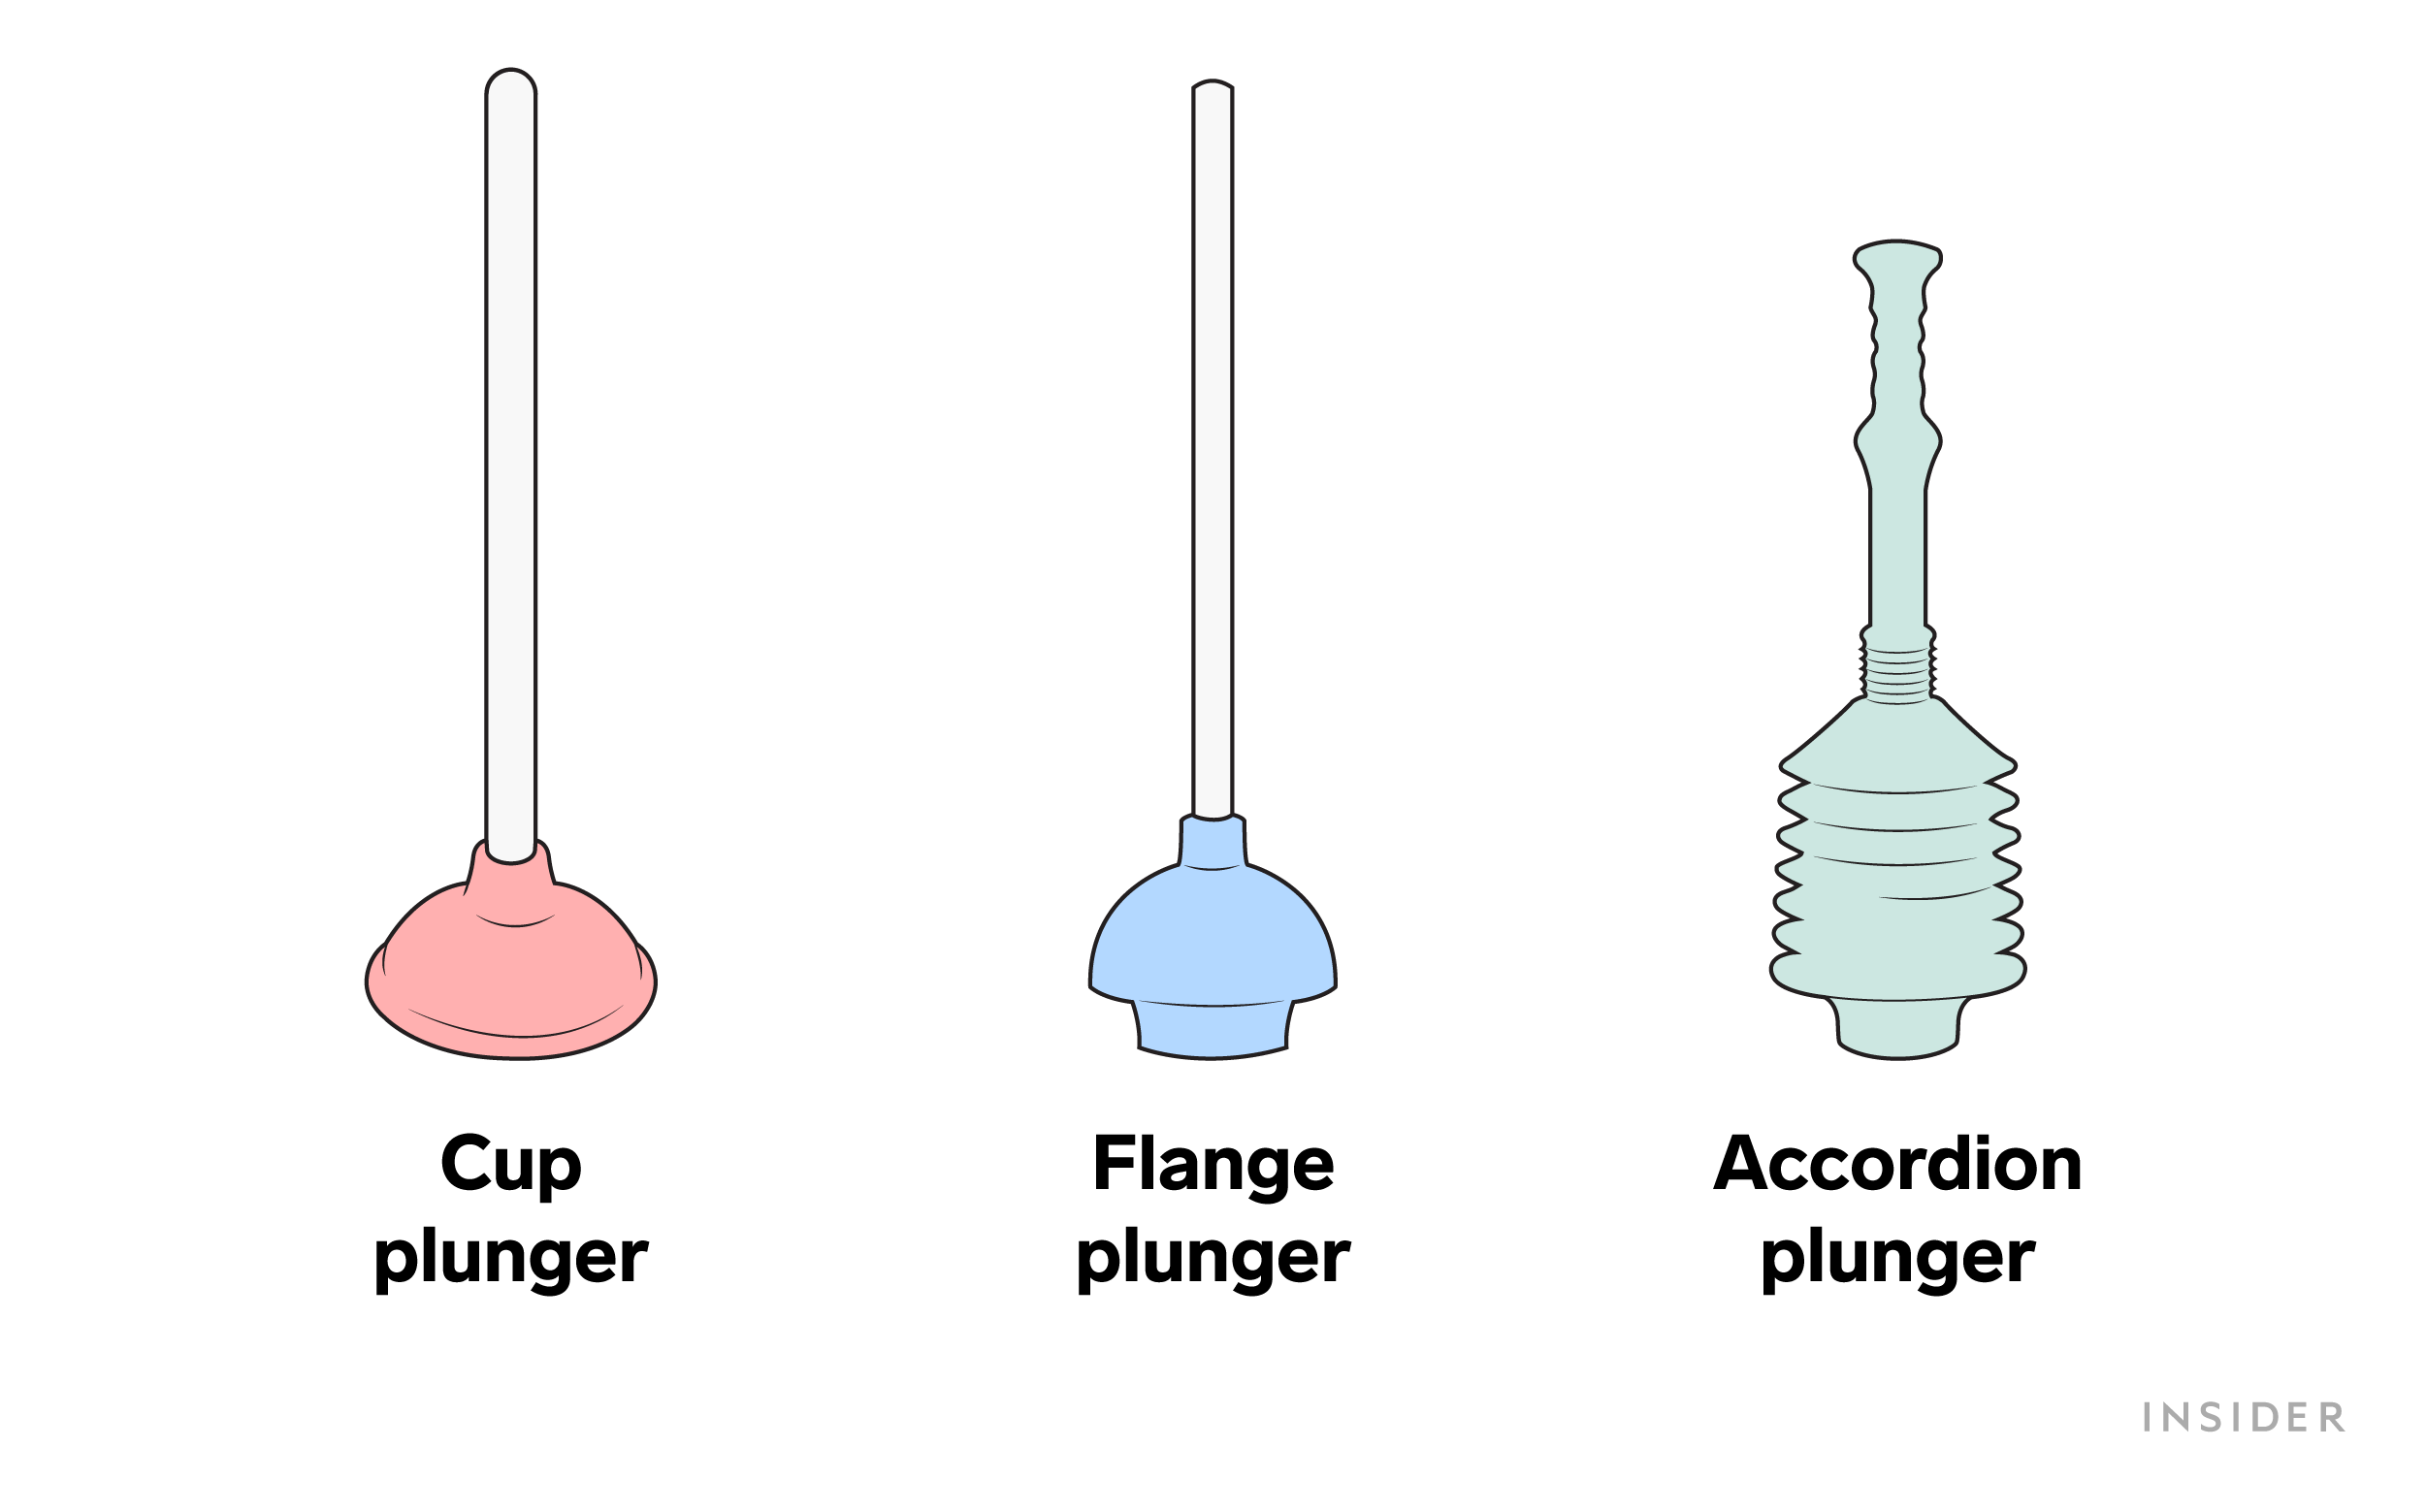 Illustrations of three different types of plungers, including cup, flange, and accordion.